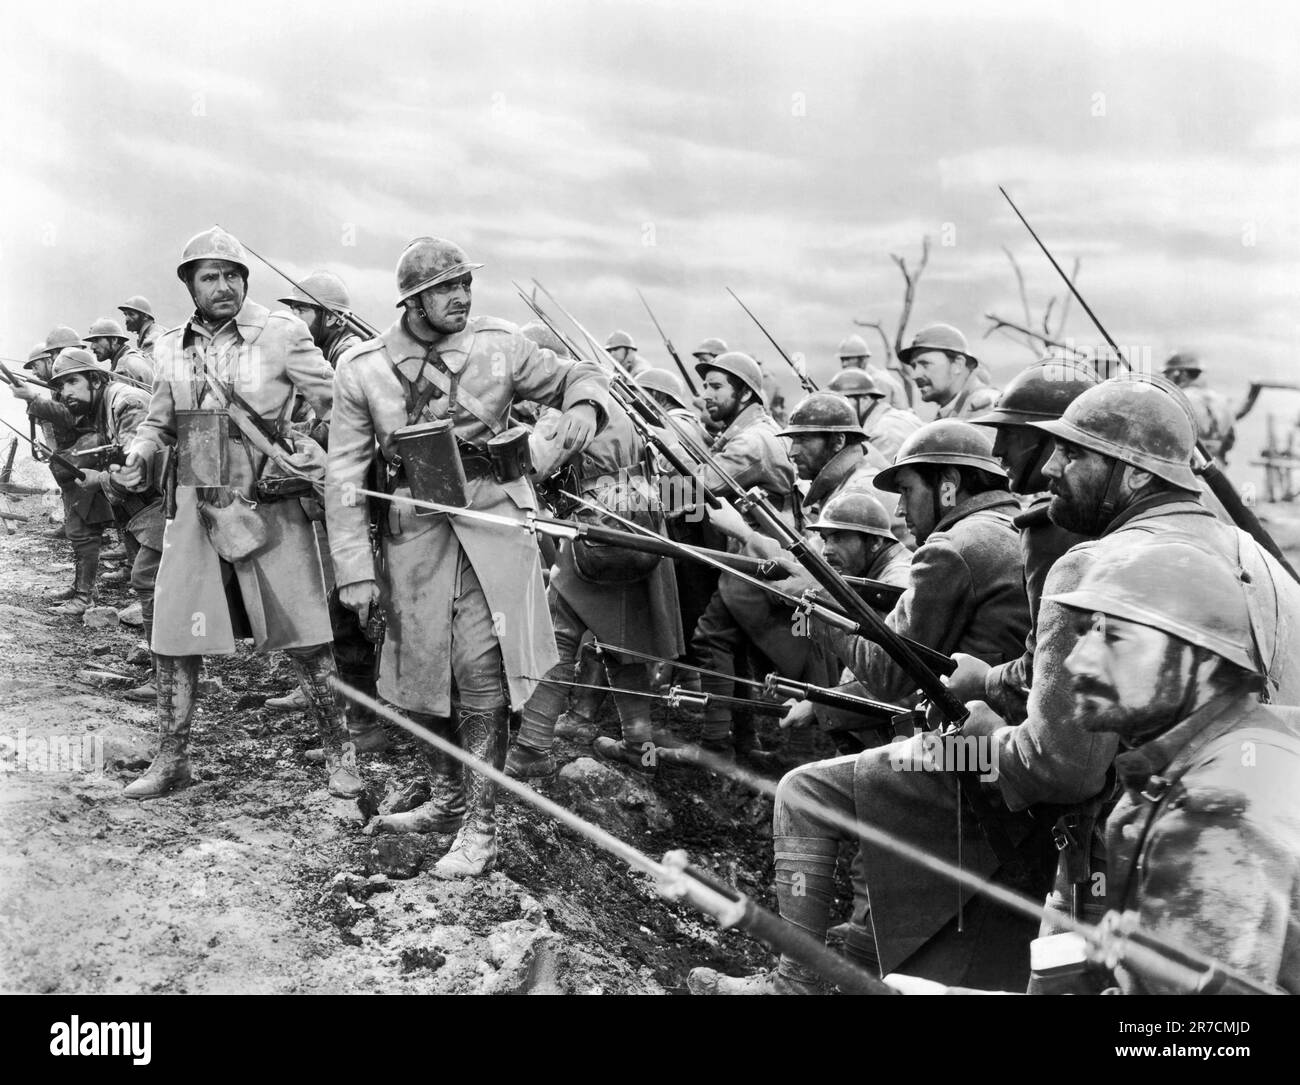 Hollywood, California, c 1925. A scene from a WWI movie with the troops ready to attack with bayonets. Stock Photo